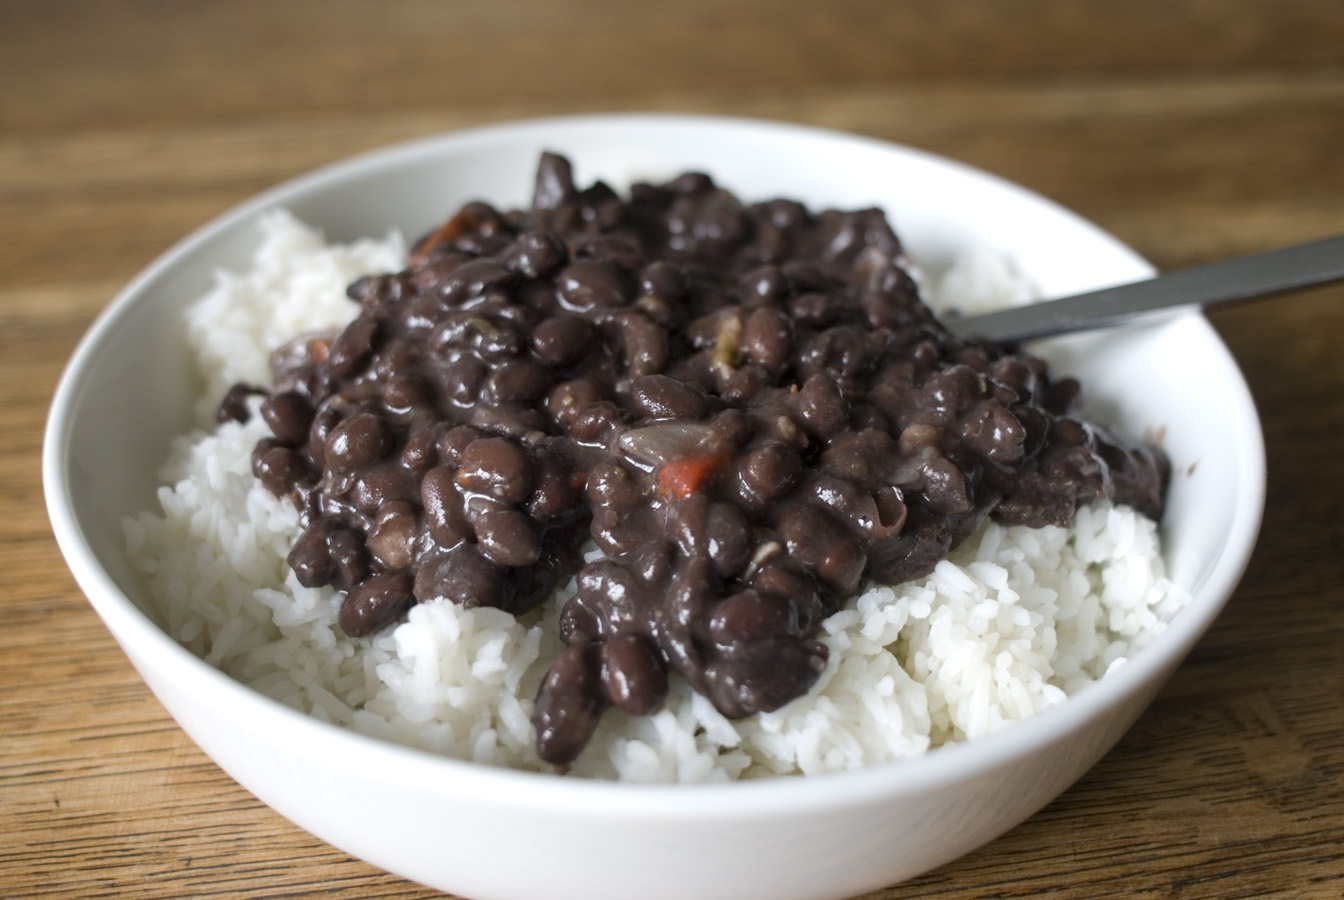 Rice and beans are a prepper staple and a great option for emergency food storage, but make sure you have variety or family might balk.